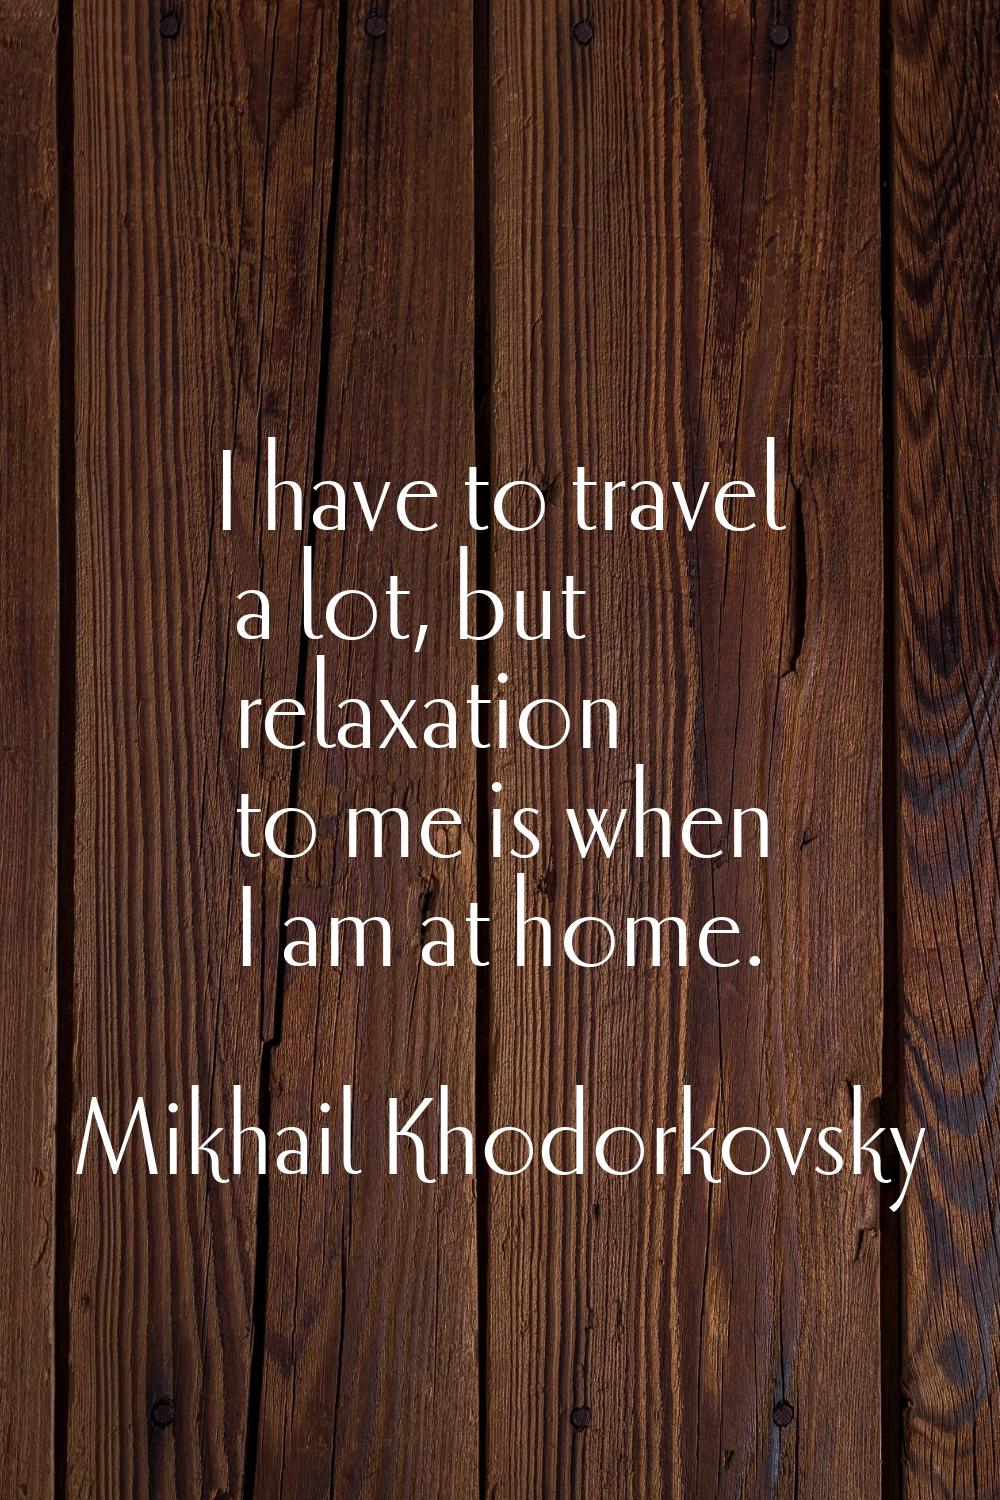 I have to travel a lot, but relaxation to me is when I am at home.